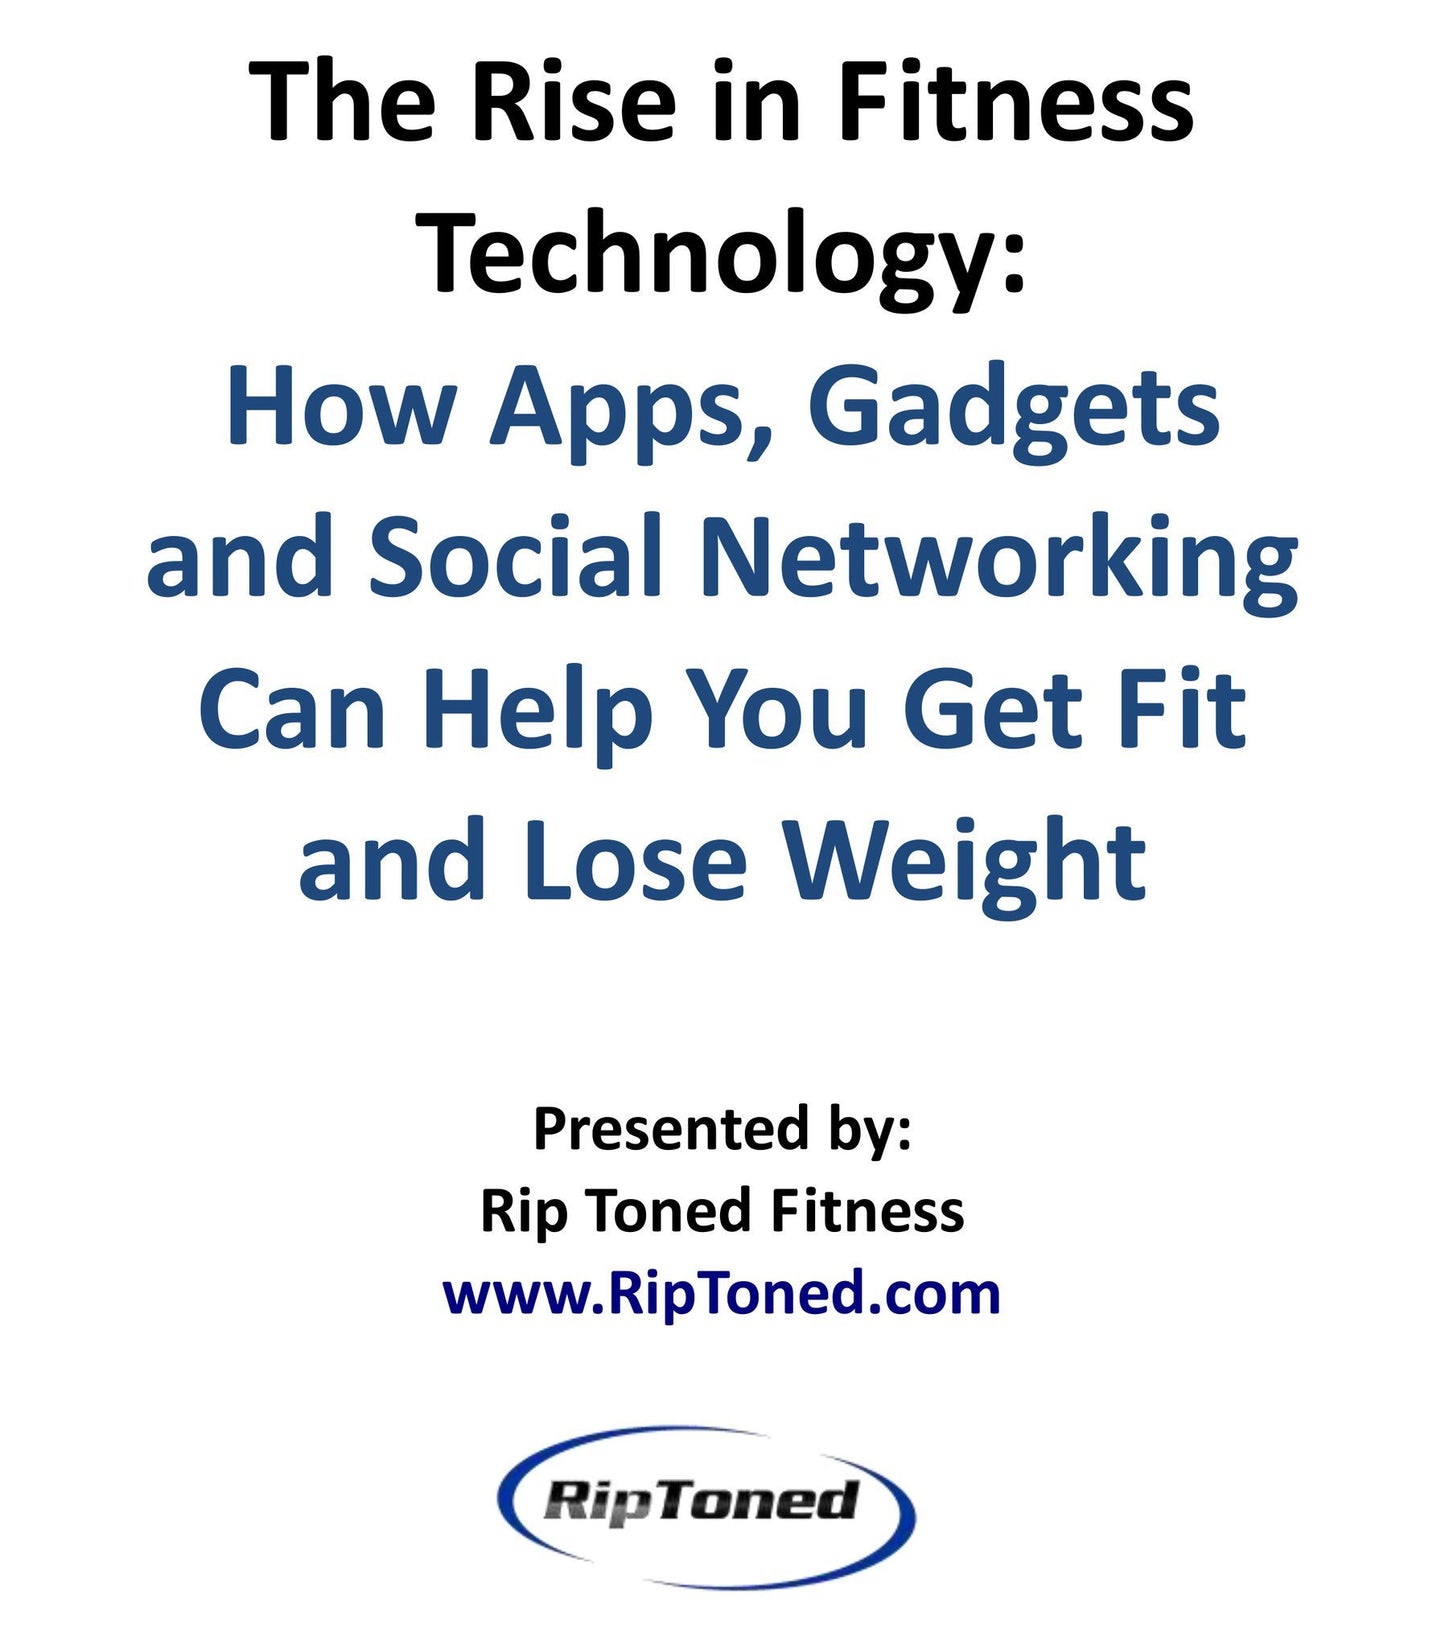 The Rise in Fitness Technology - Rip Toned